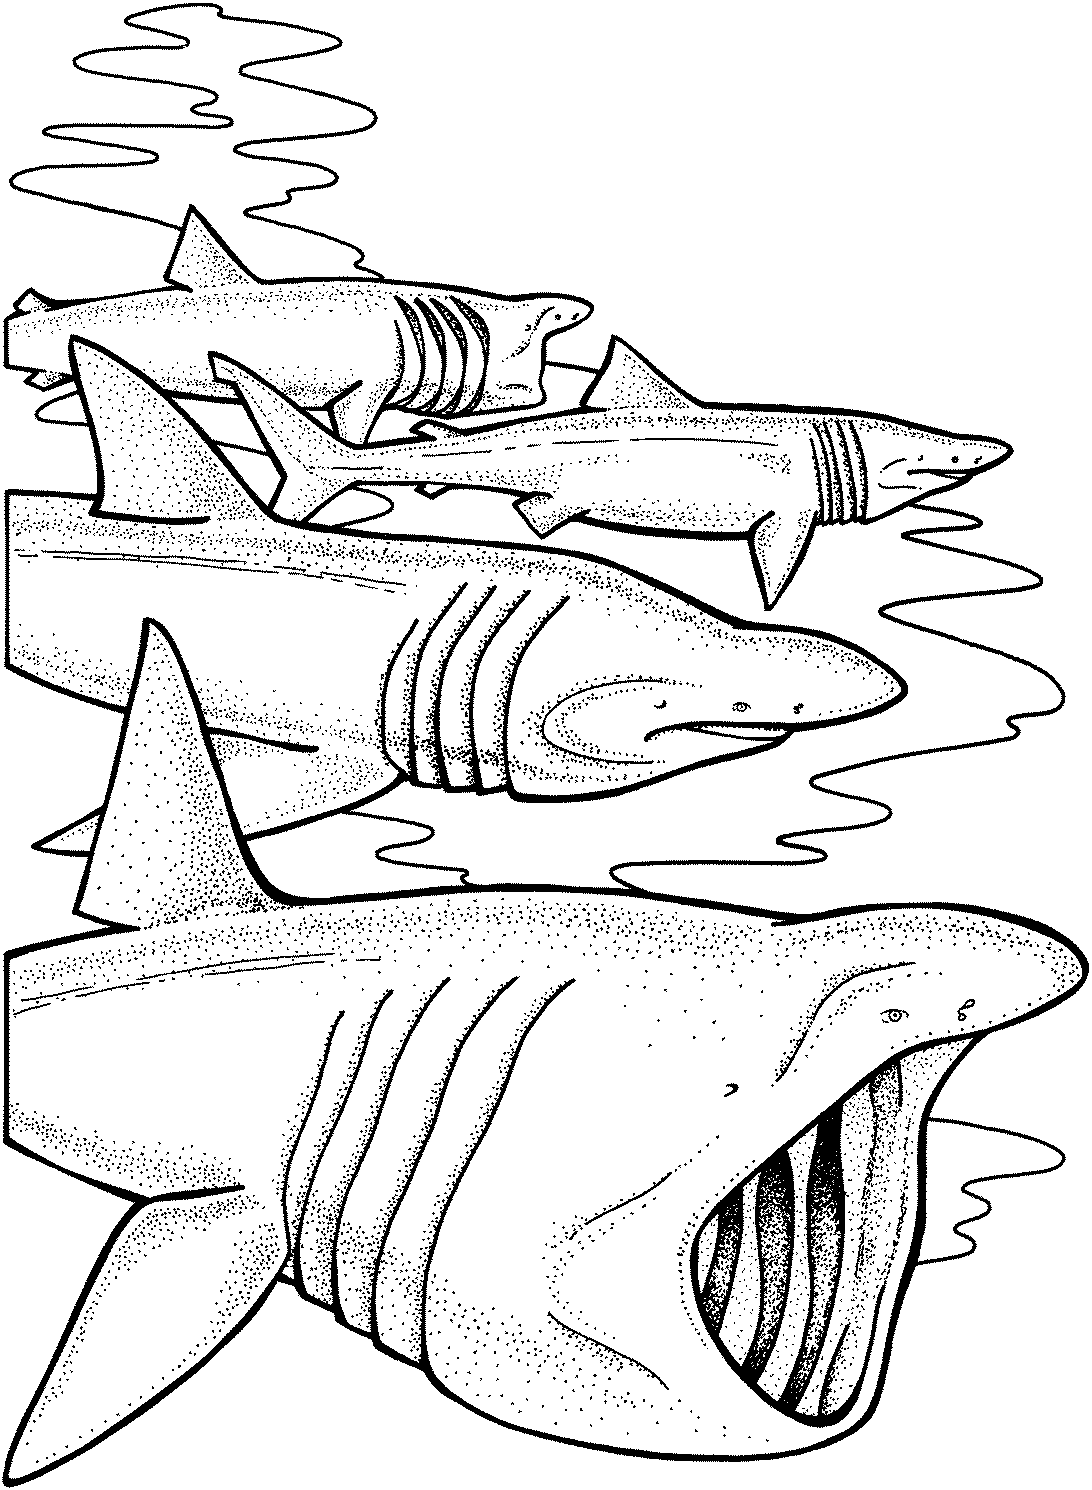 sharks coloring pages printable free hammerhead shark template download free clip art coloring printable sharks pages 